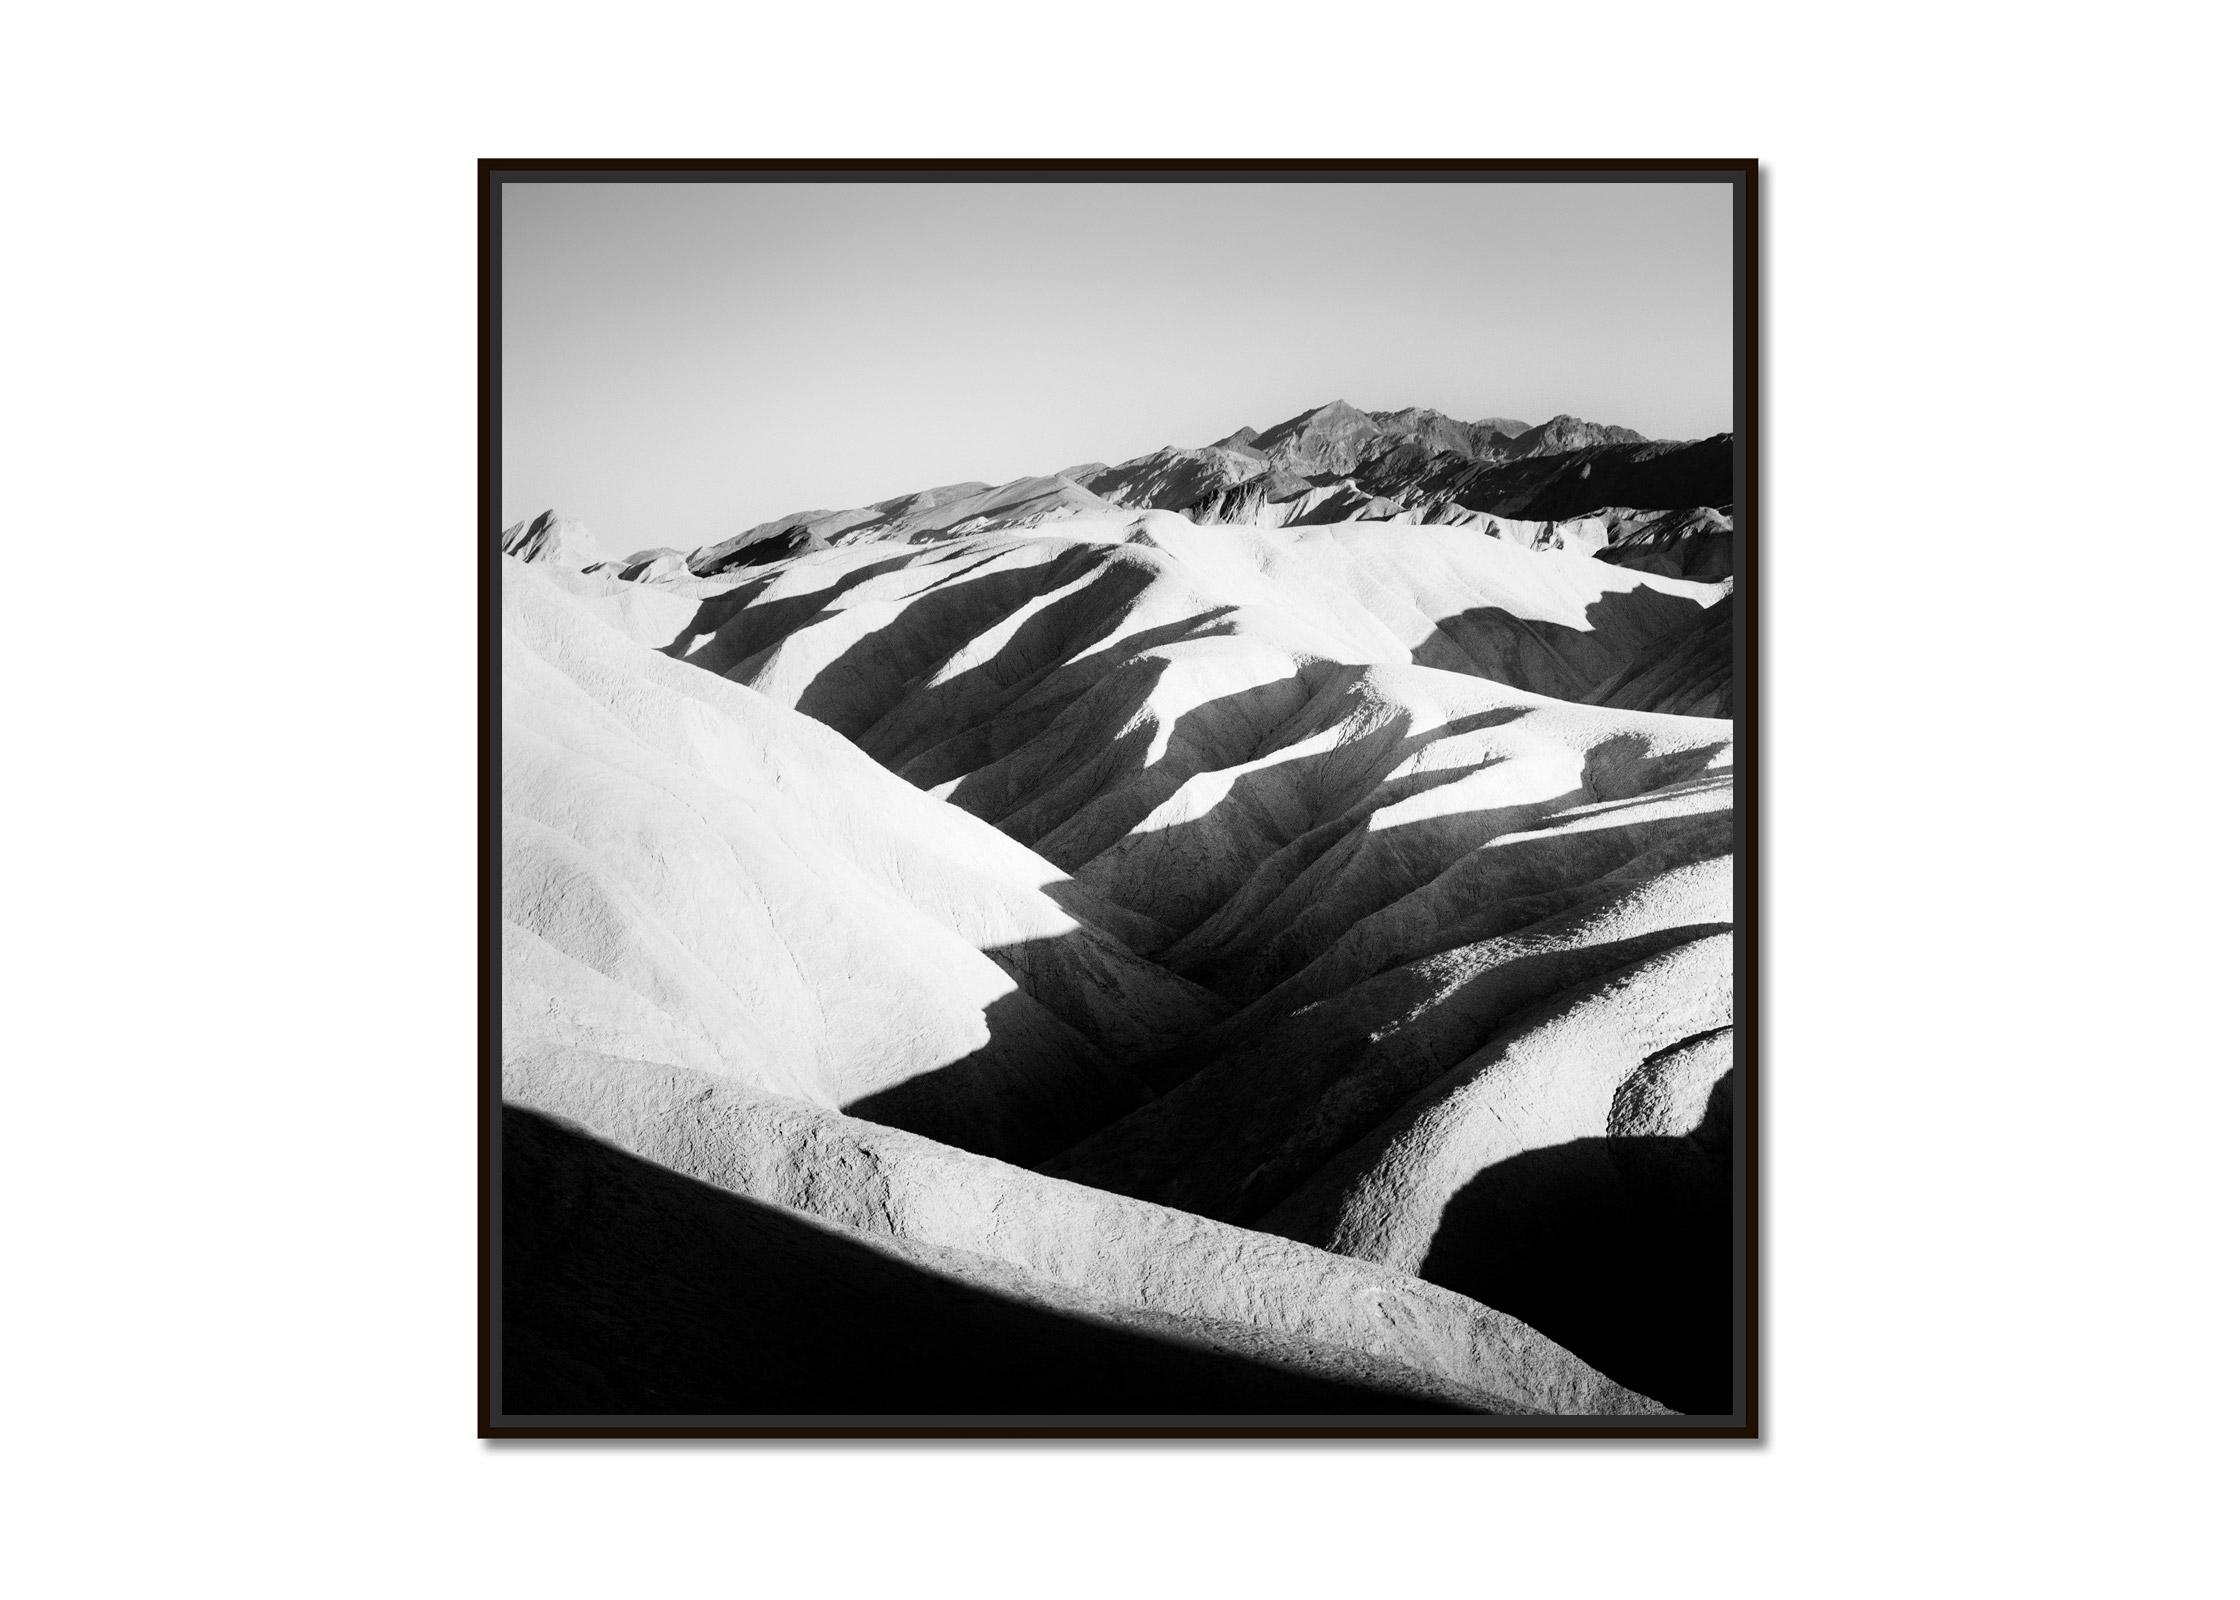 Shadow Mountains, USA, Death Valley, black and white landscape art photography - Photograph by Gerald Berghammer